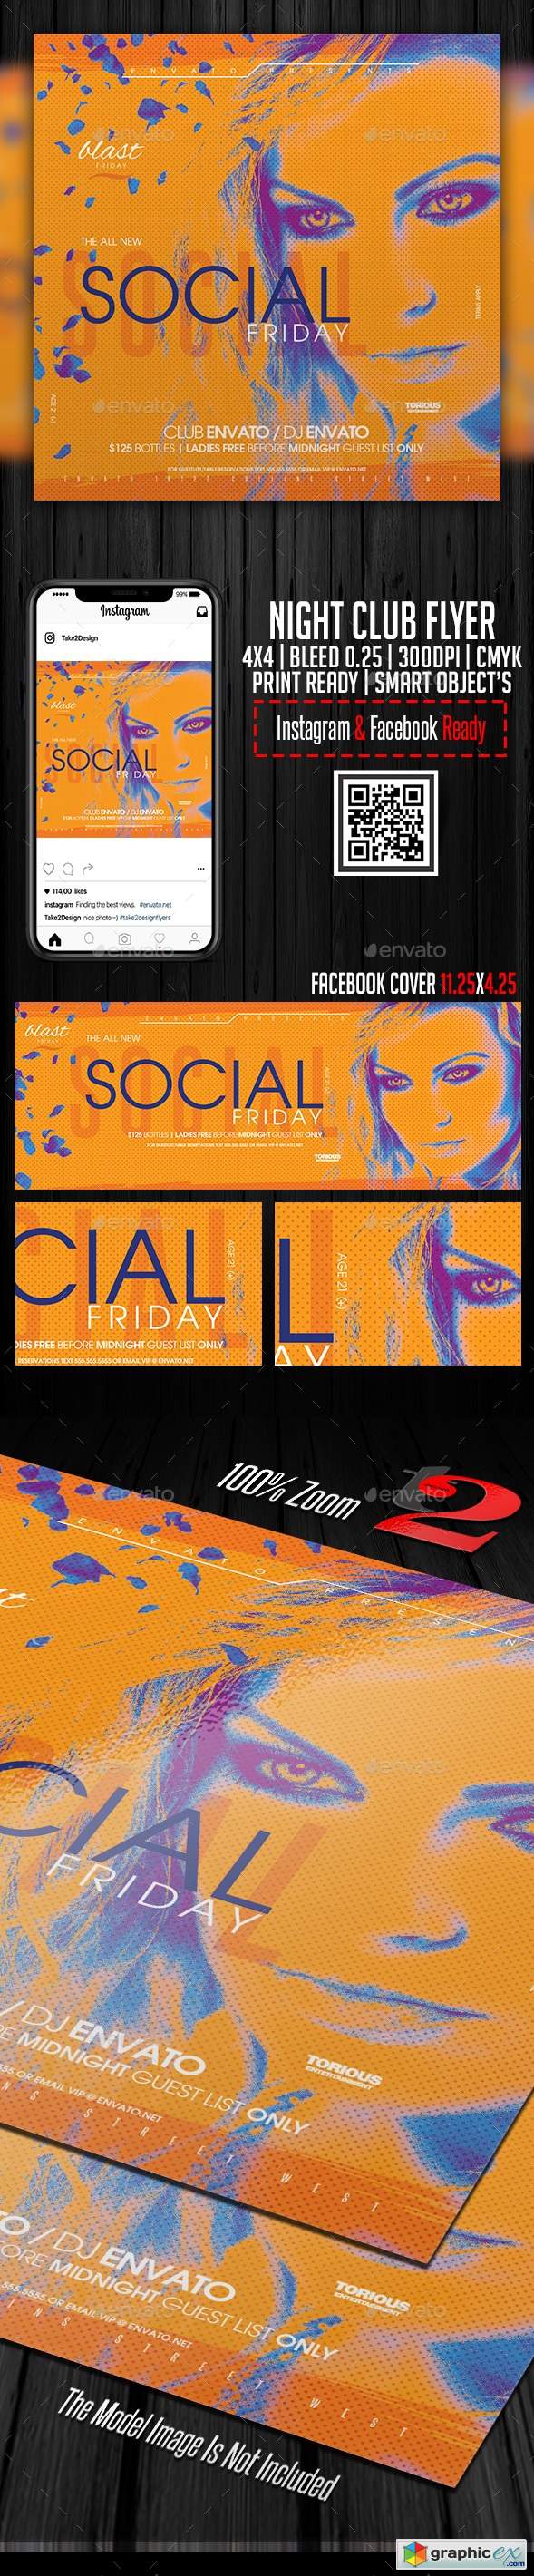 Night Club Flyer & Facebook Cover Template